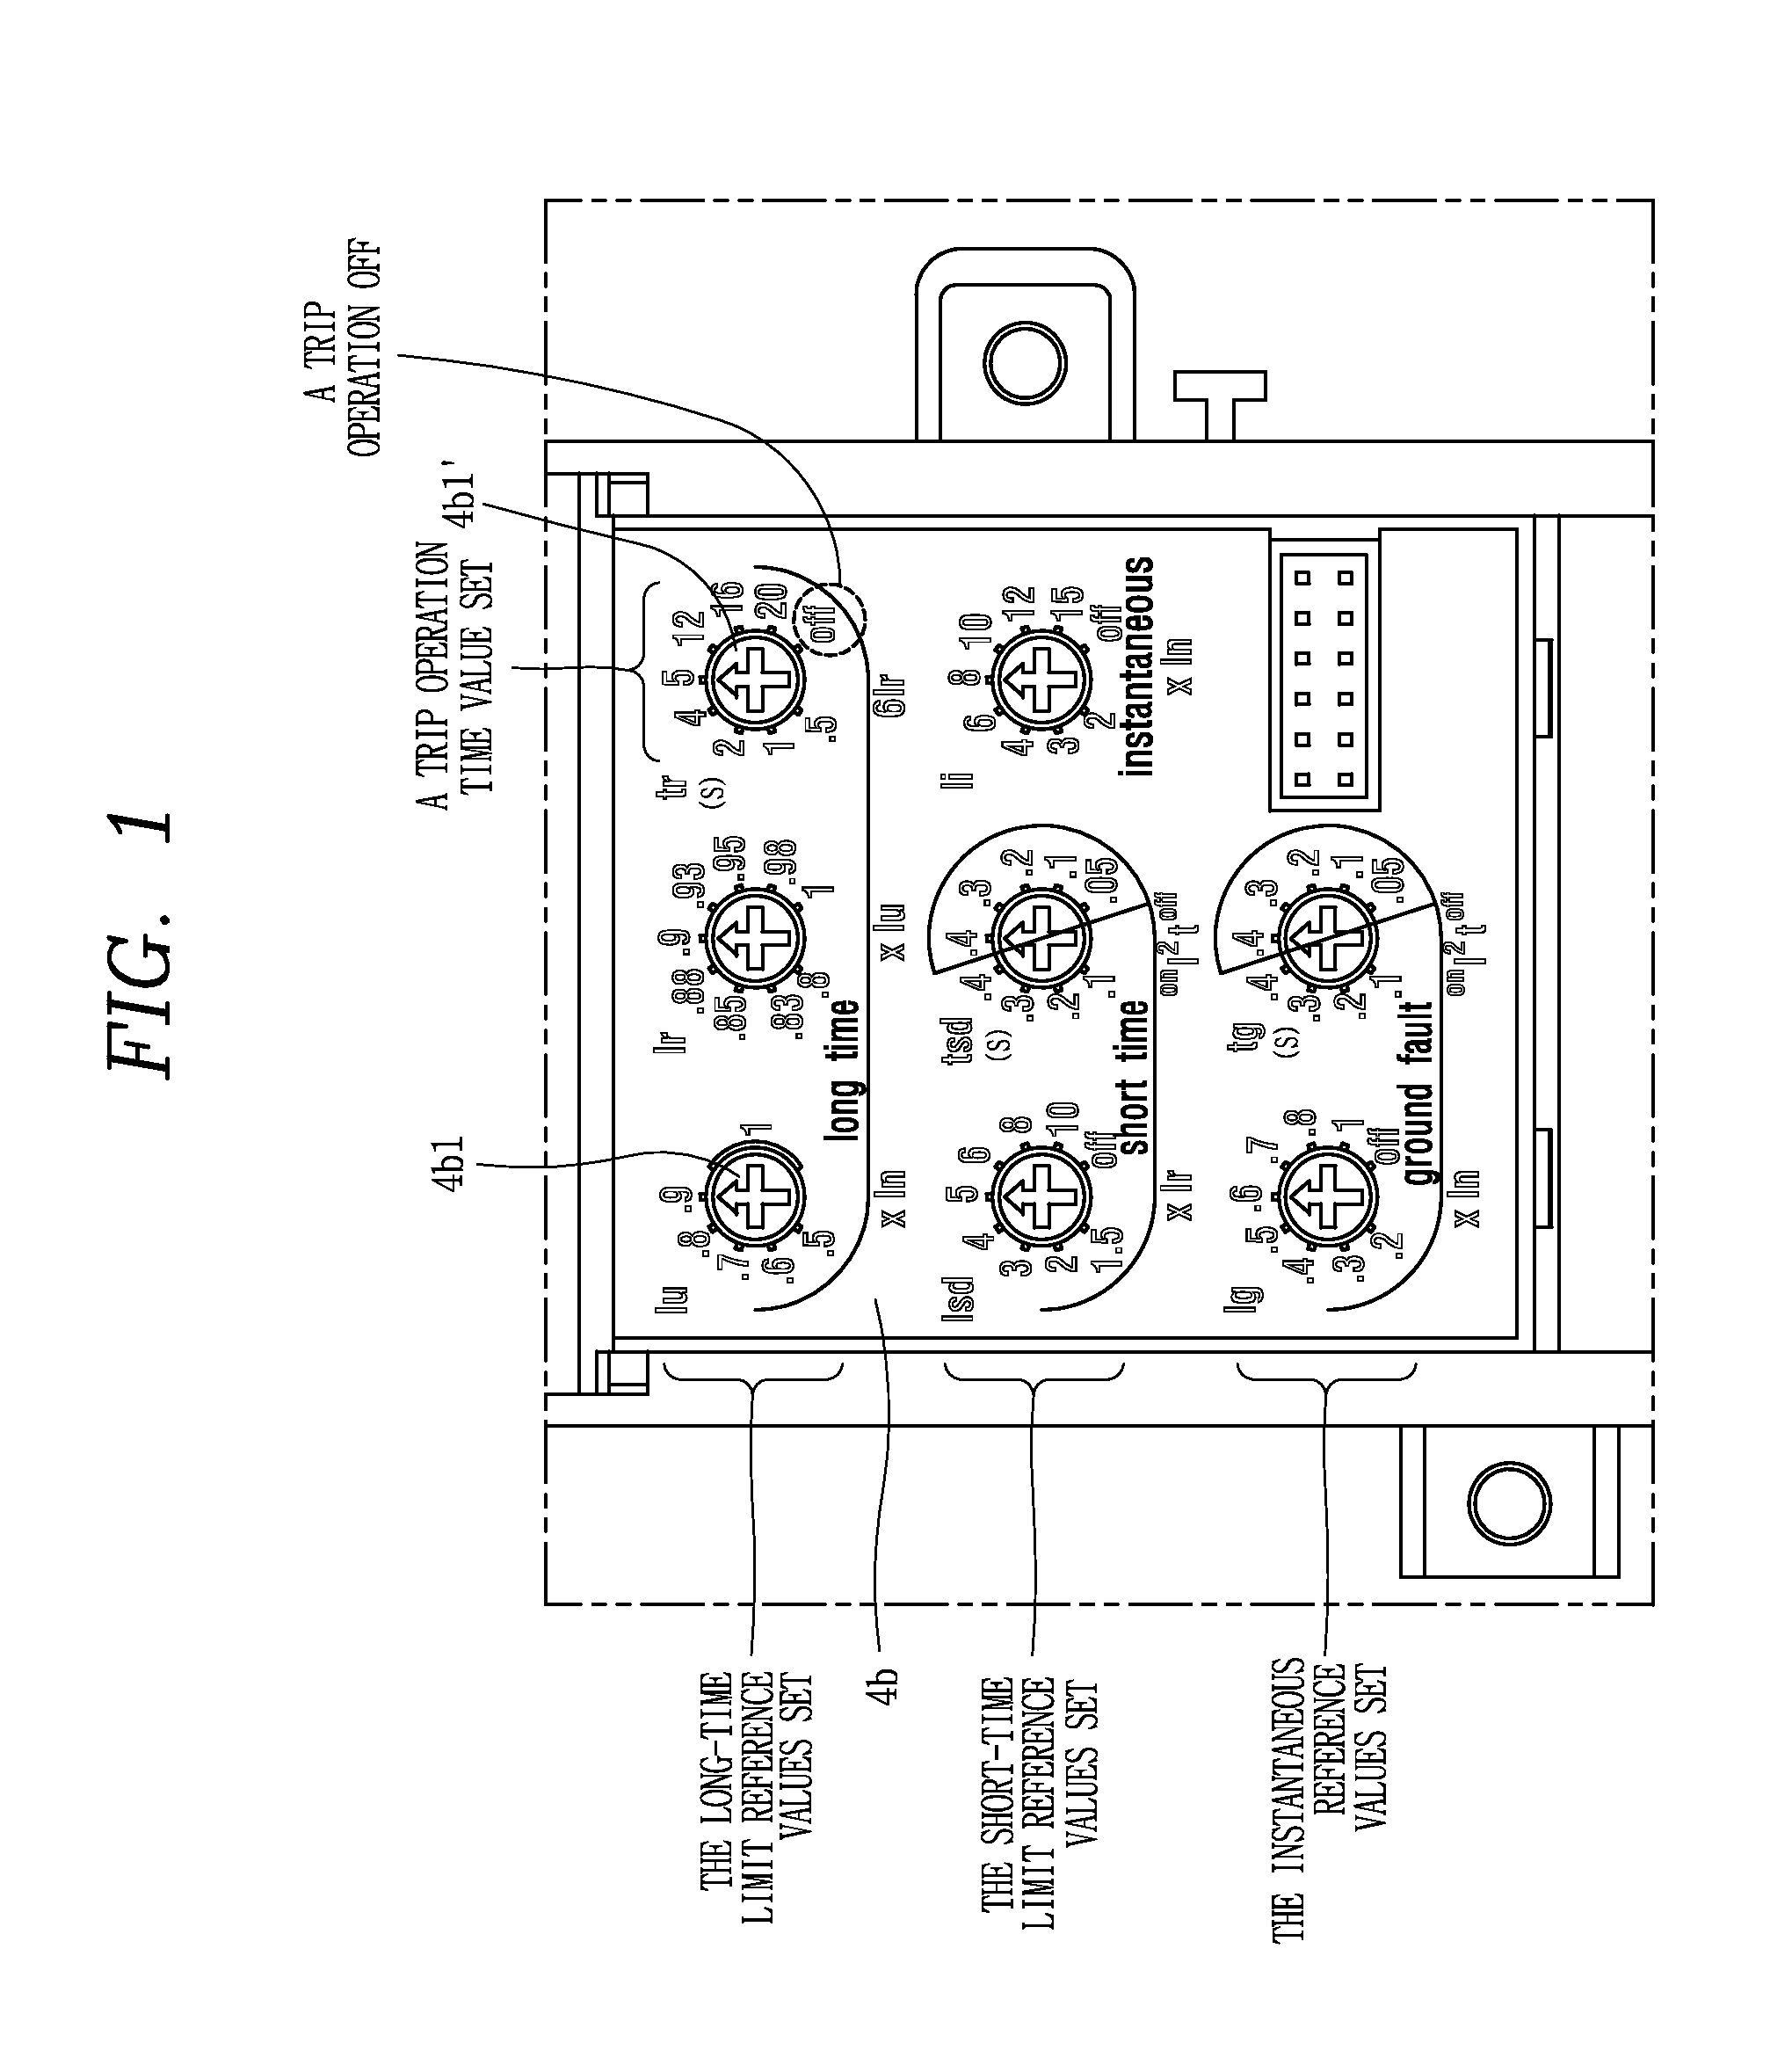 Overcurrent relay and molded case circuit breaker with the same